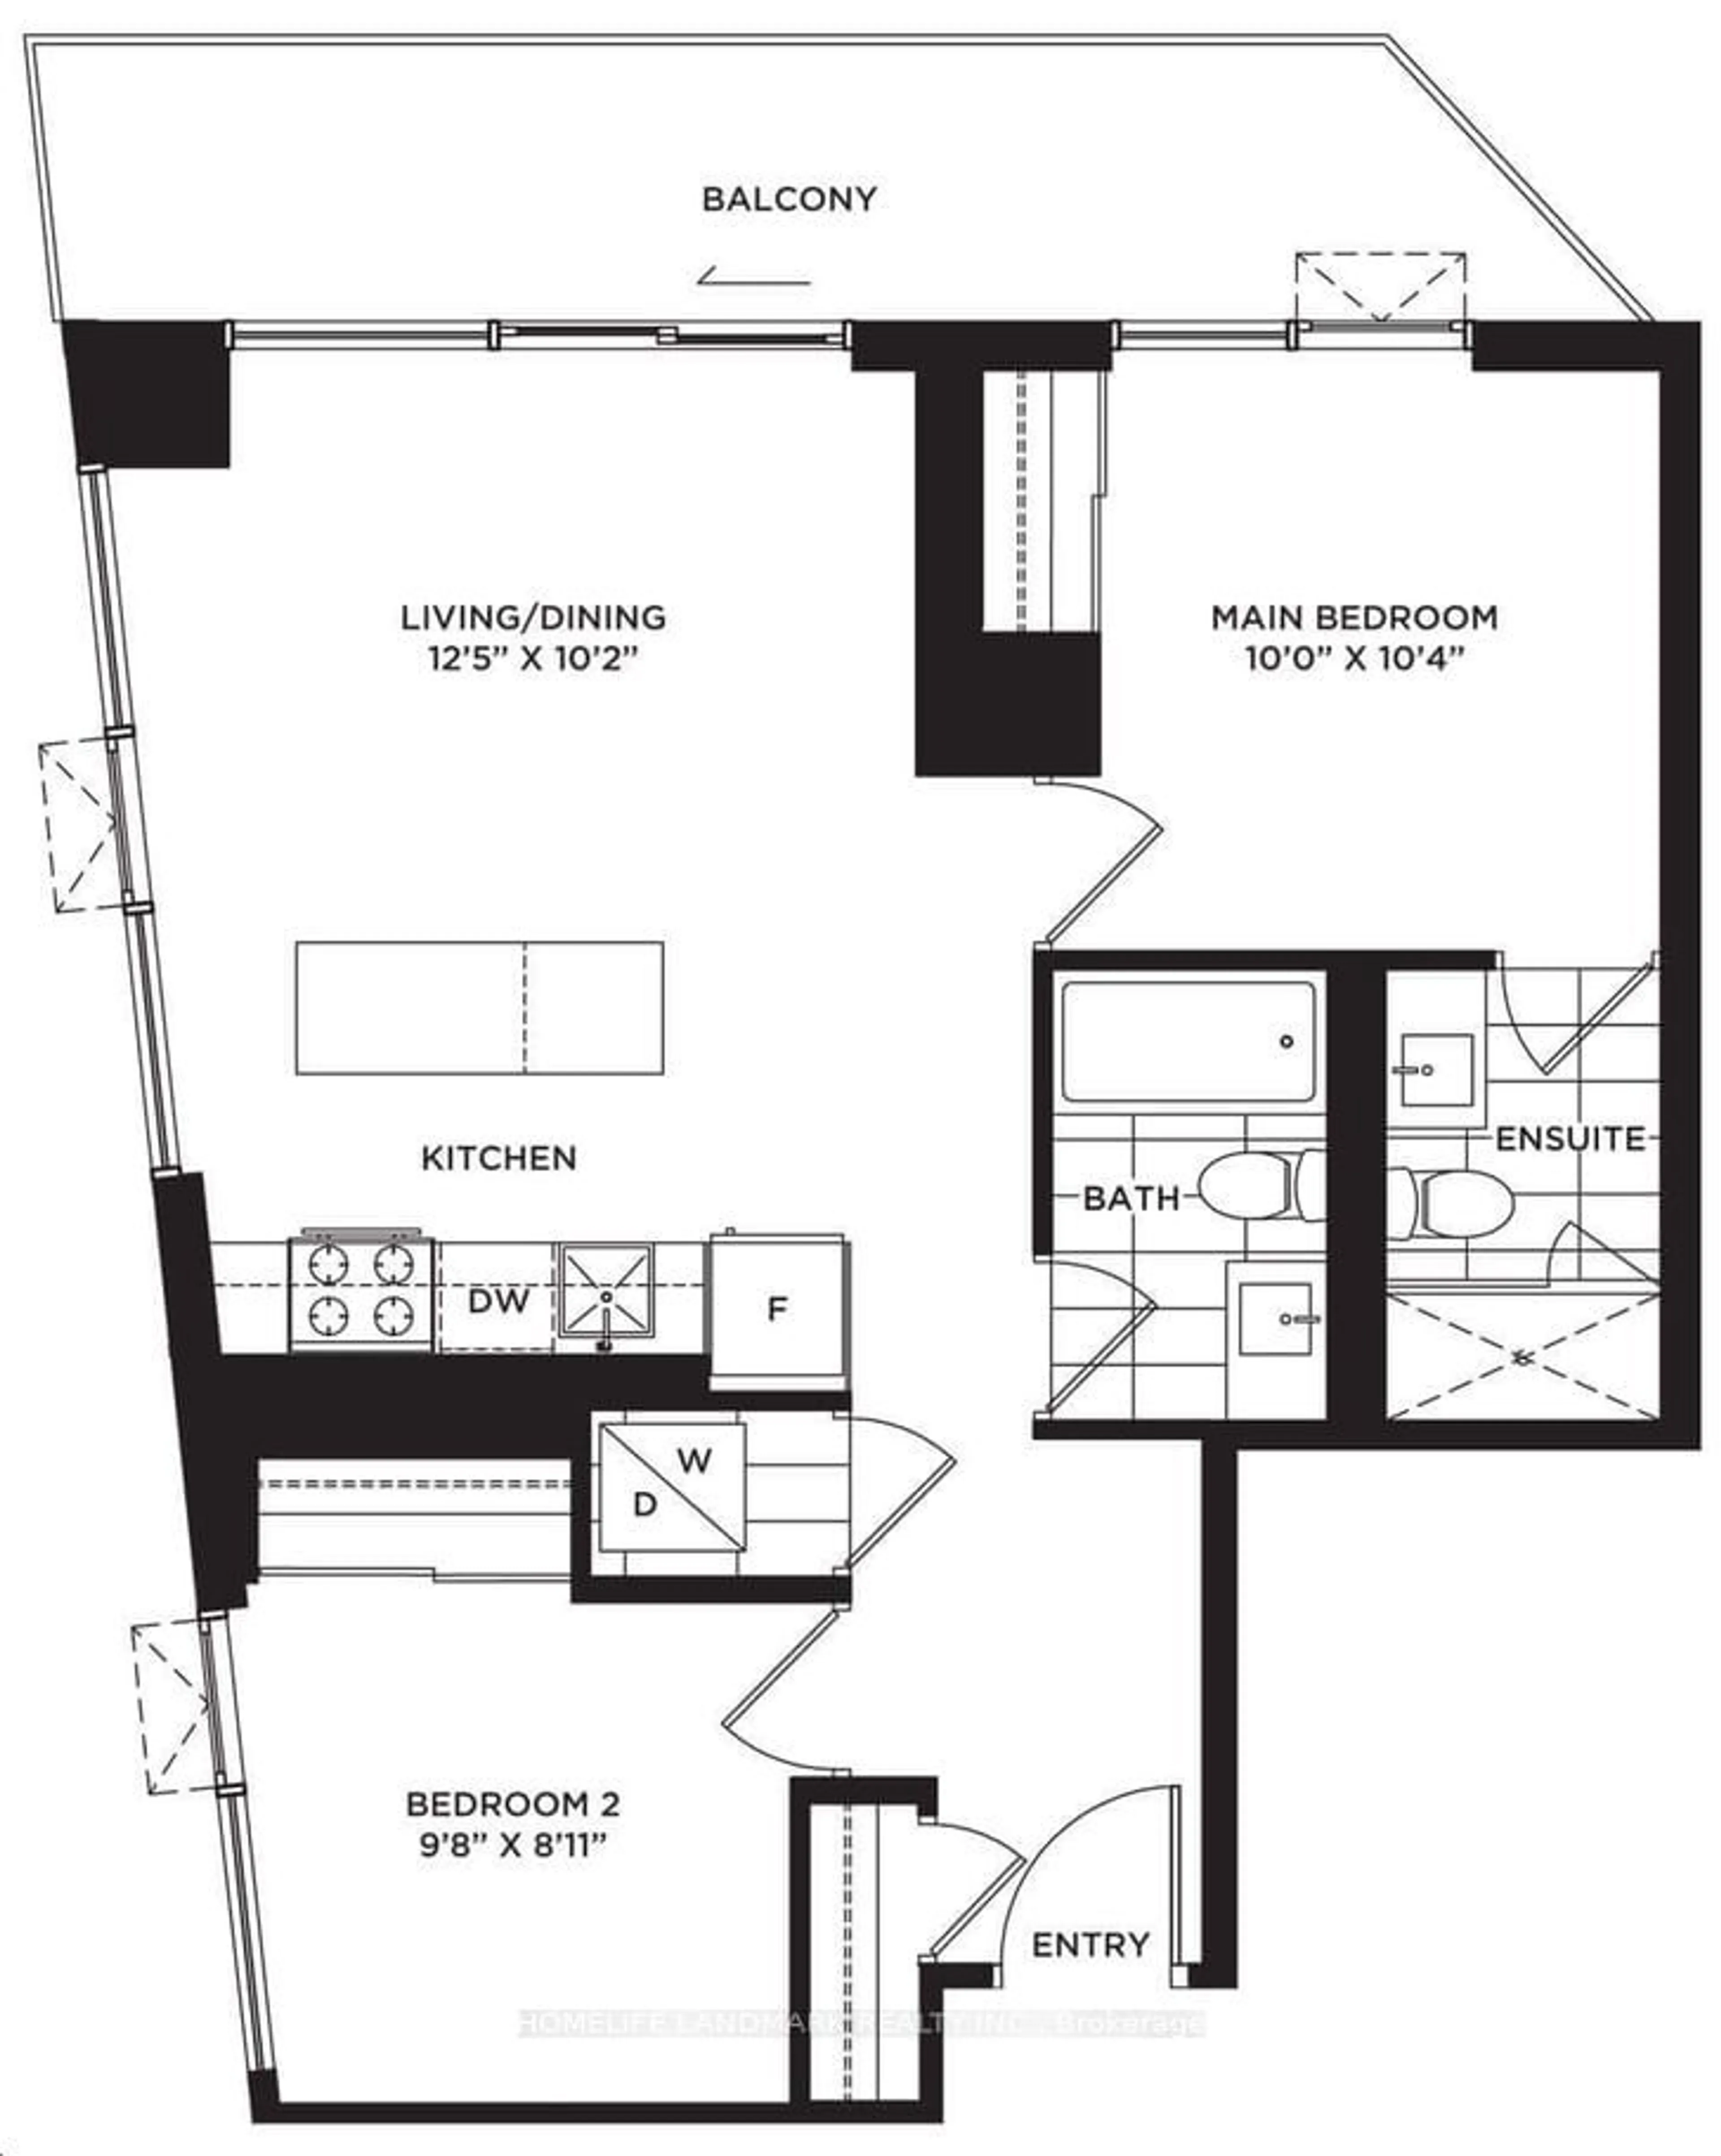 Floor plan for 4065 Confederation Pkwy #2604, Mississauga Ontario L5B 0L4